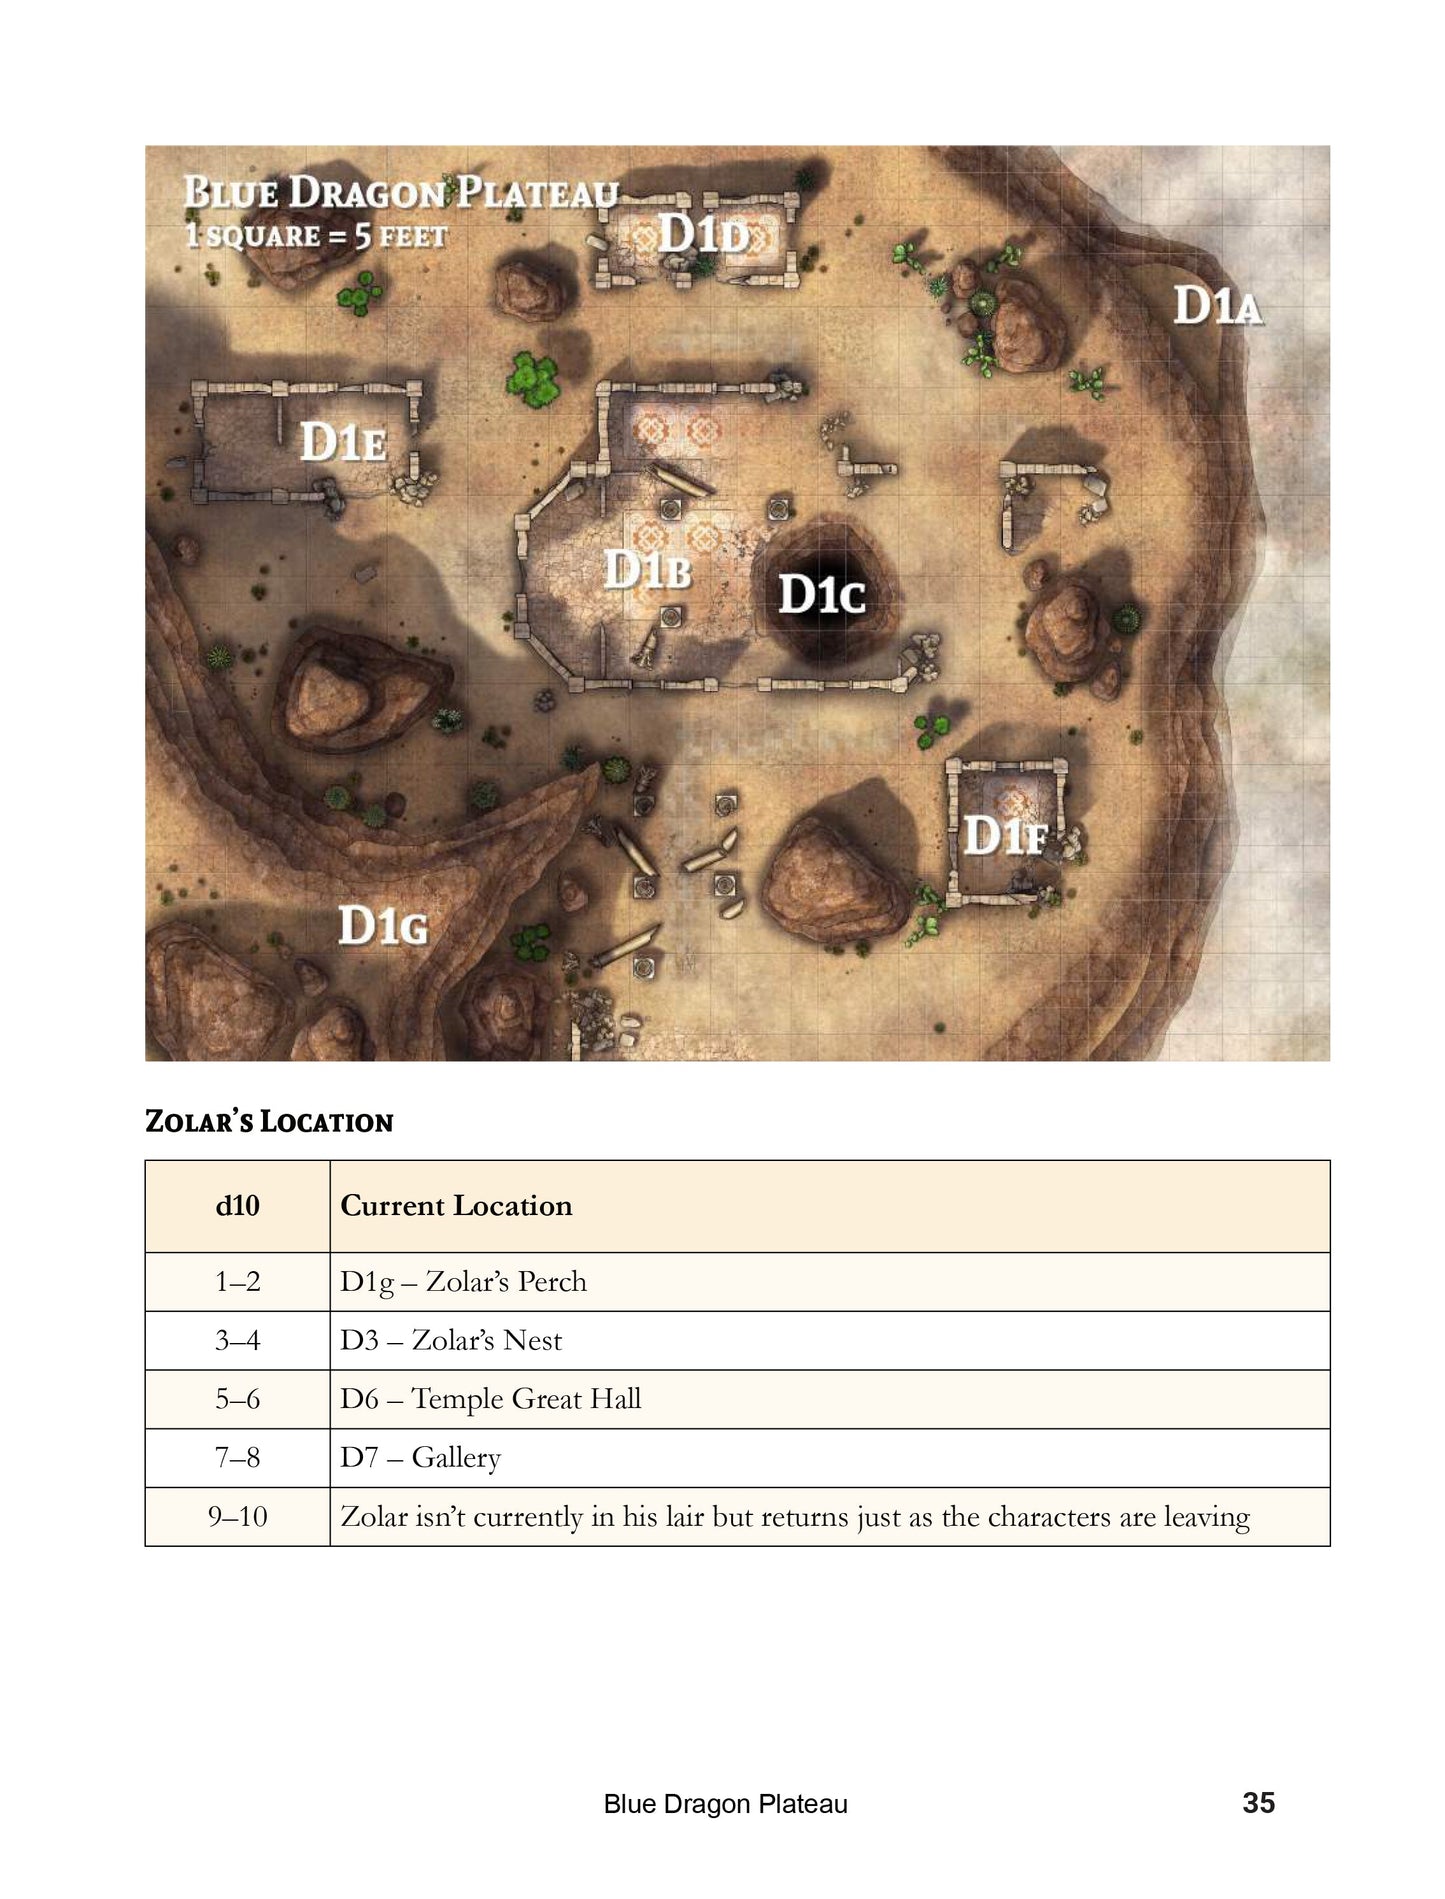 Dungeons & Lairs 4: Desert of Dread (PDF Only)